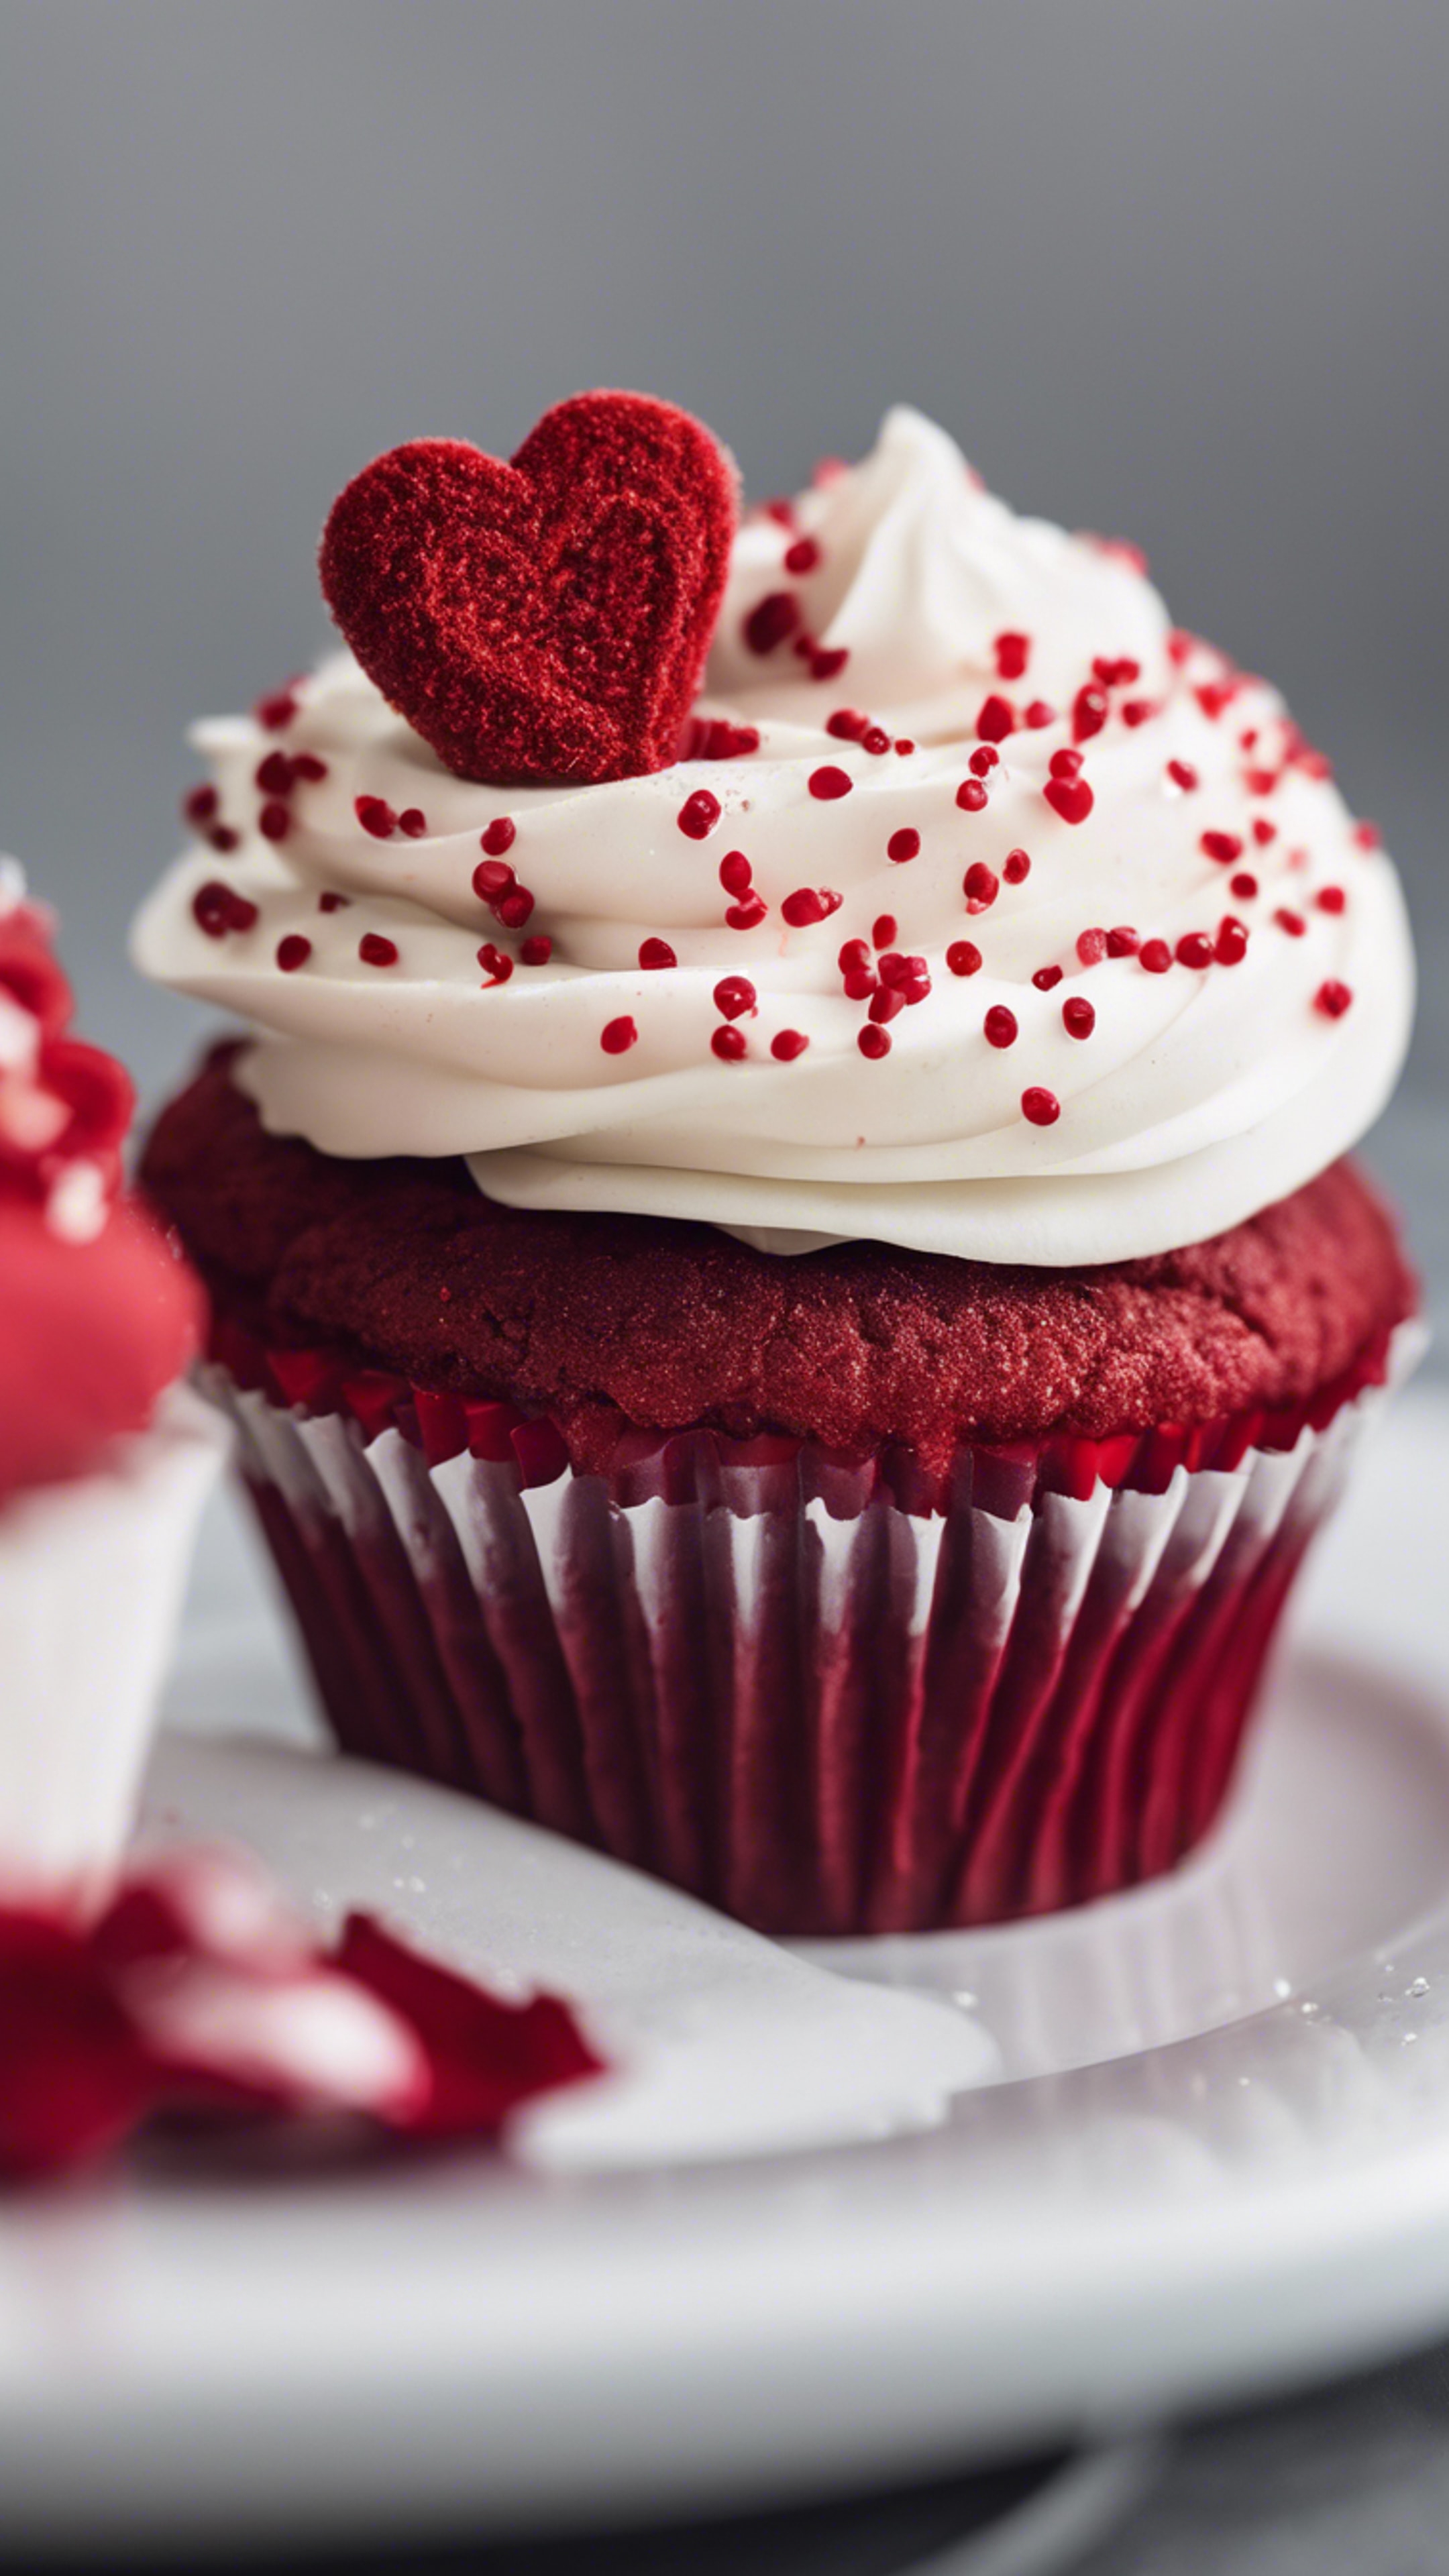 A red velvet cupcake with a heart-shaped sprinkle on top, presented on a white ceramic plate. Tapeta na zeď[2d98083c137b4c3e8f81]